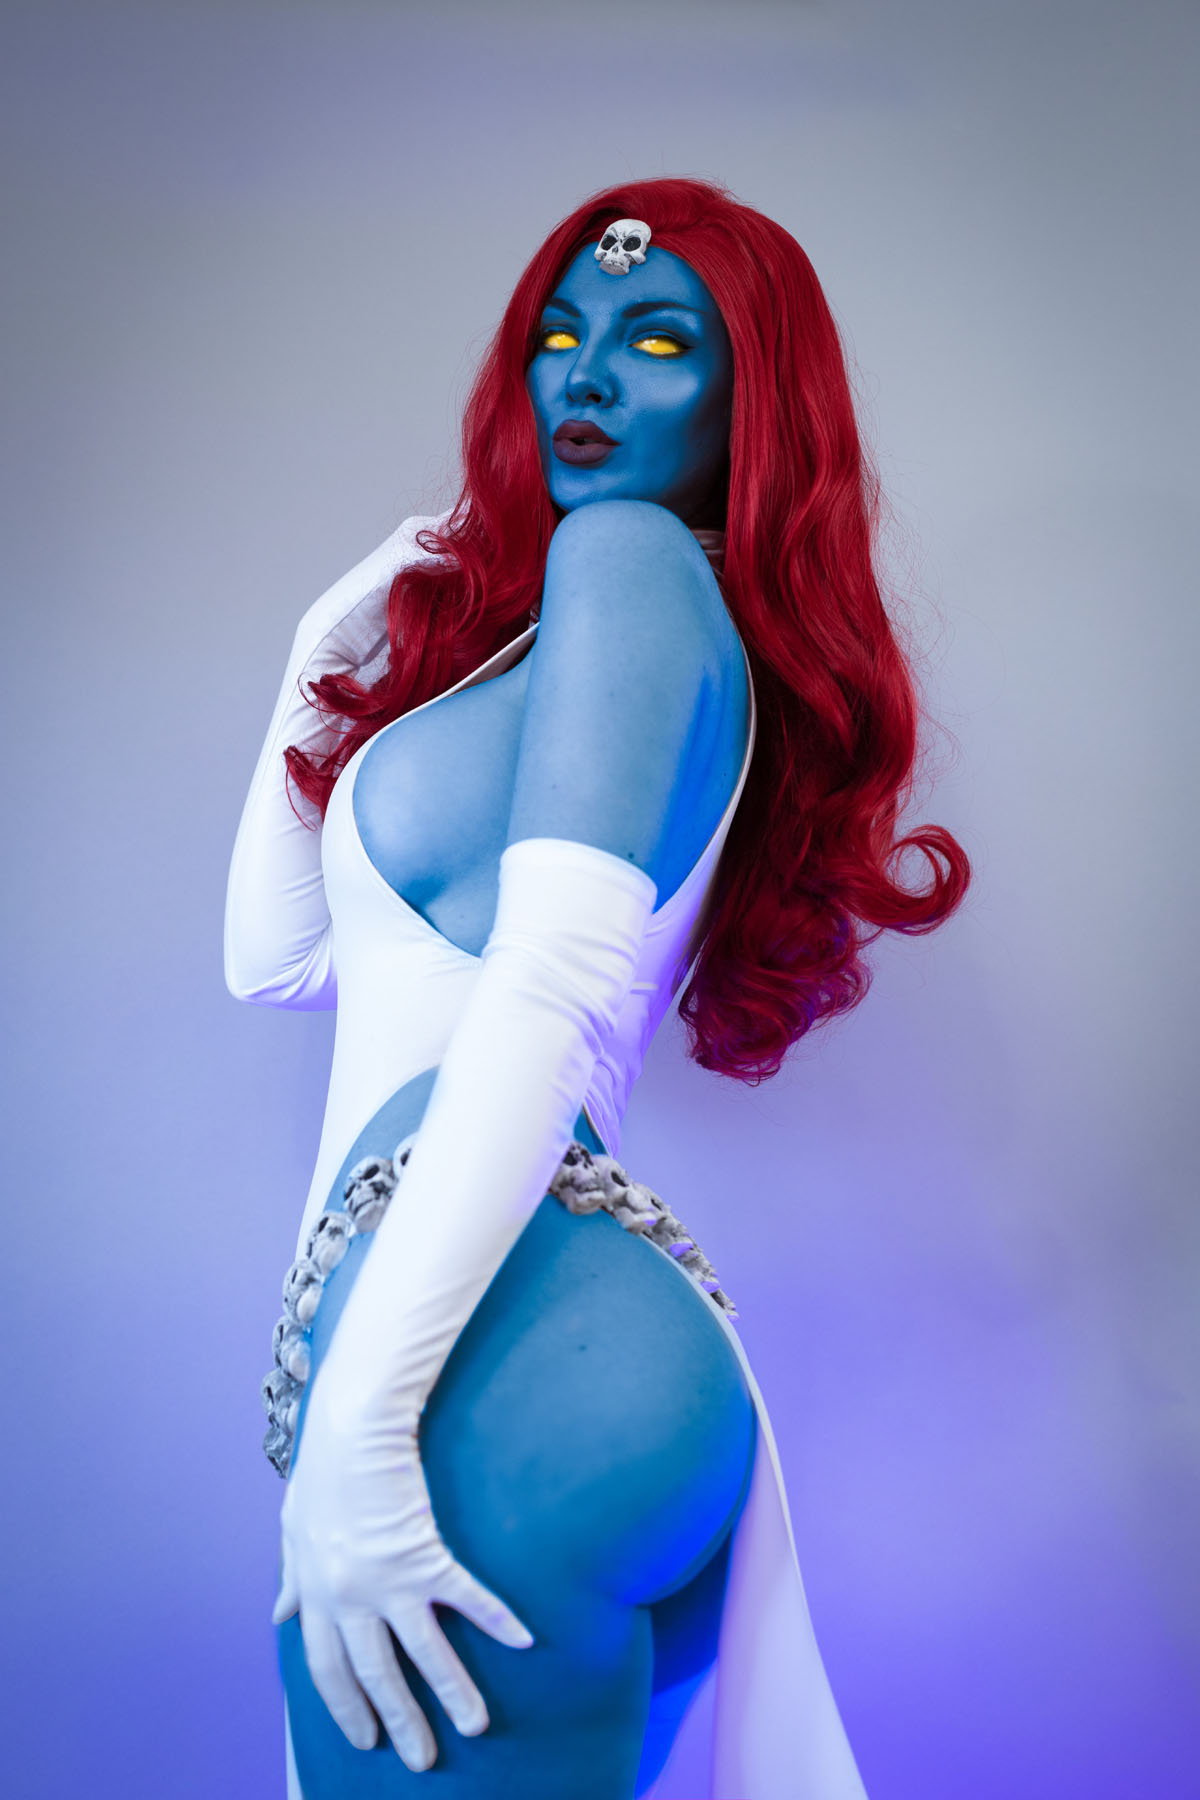 Mystique Cosplay Part 2: Wearing the Costume #1